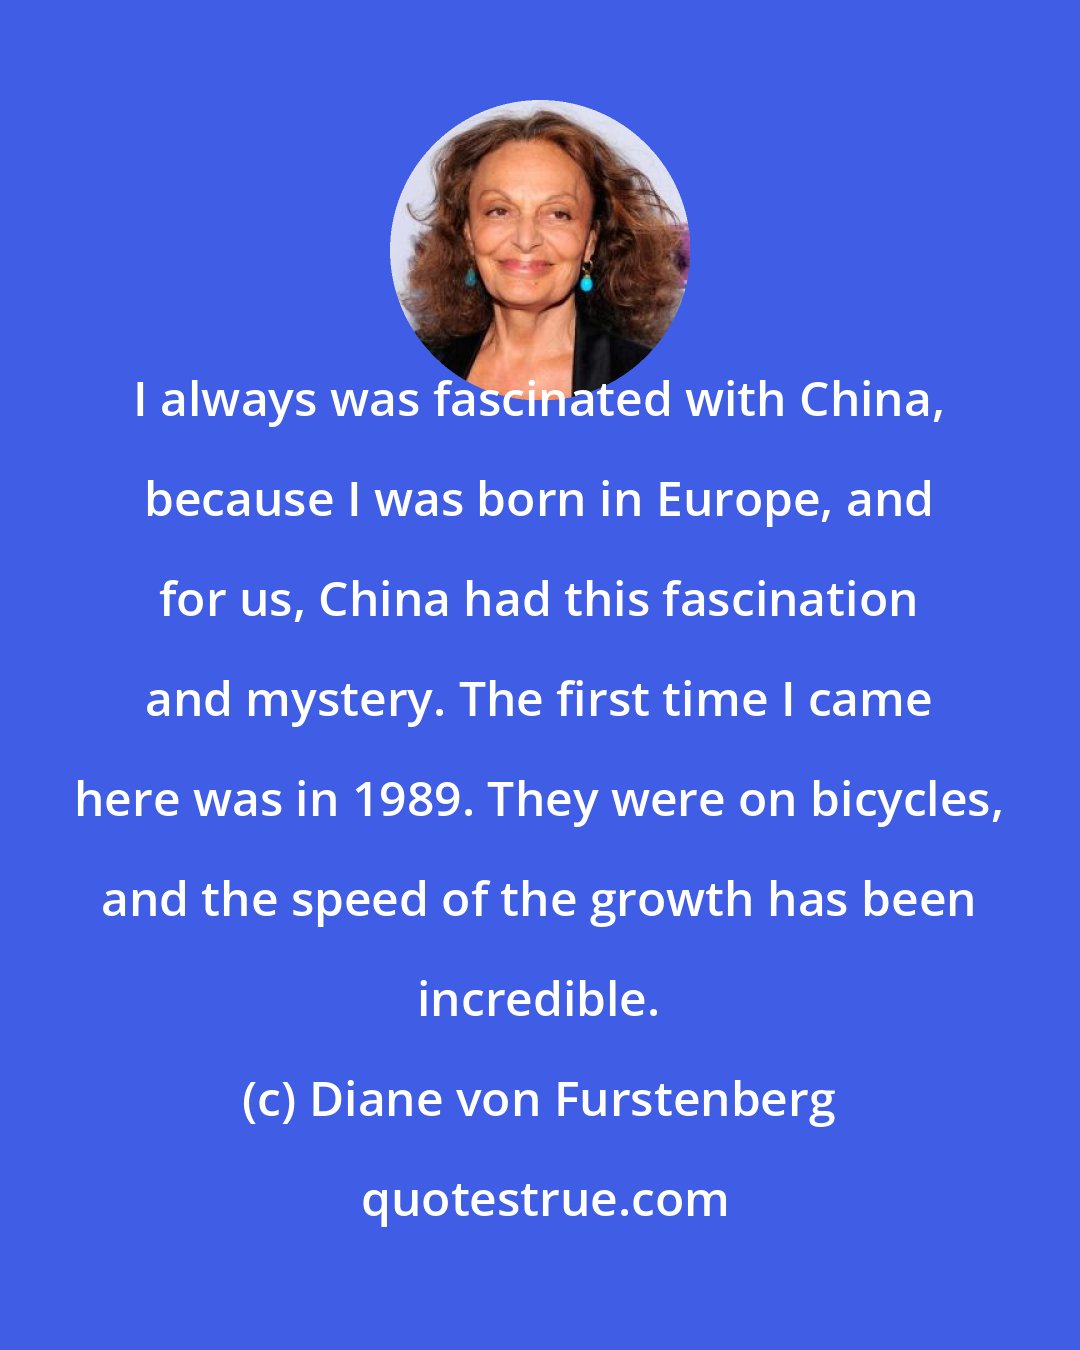 Diane von Furstenberg: I always was fascinated with China, because I was born in Europe, and for us, China had this fascination and mystery. The first time I came here was in 1989. They were on bicycles, and the speed of the growth has been incredible.